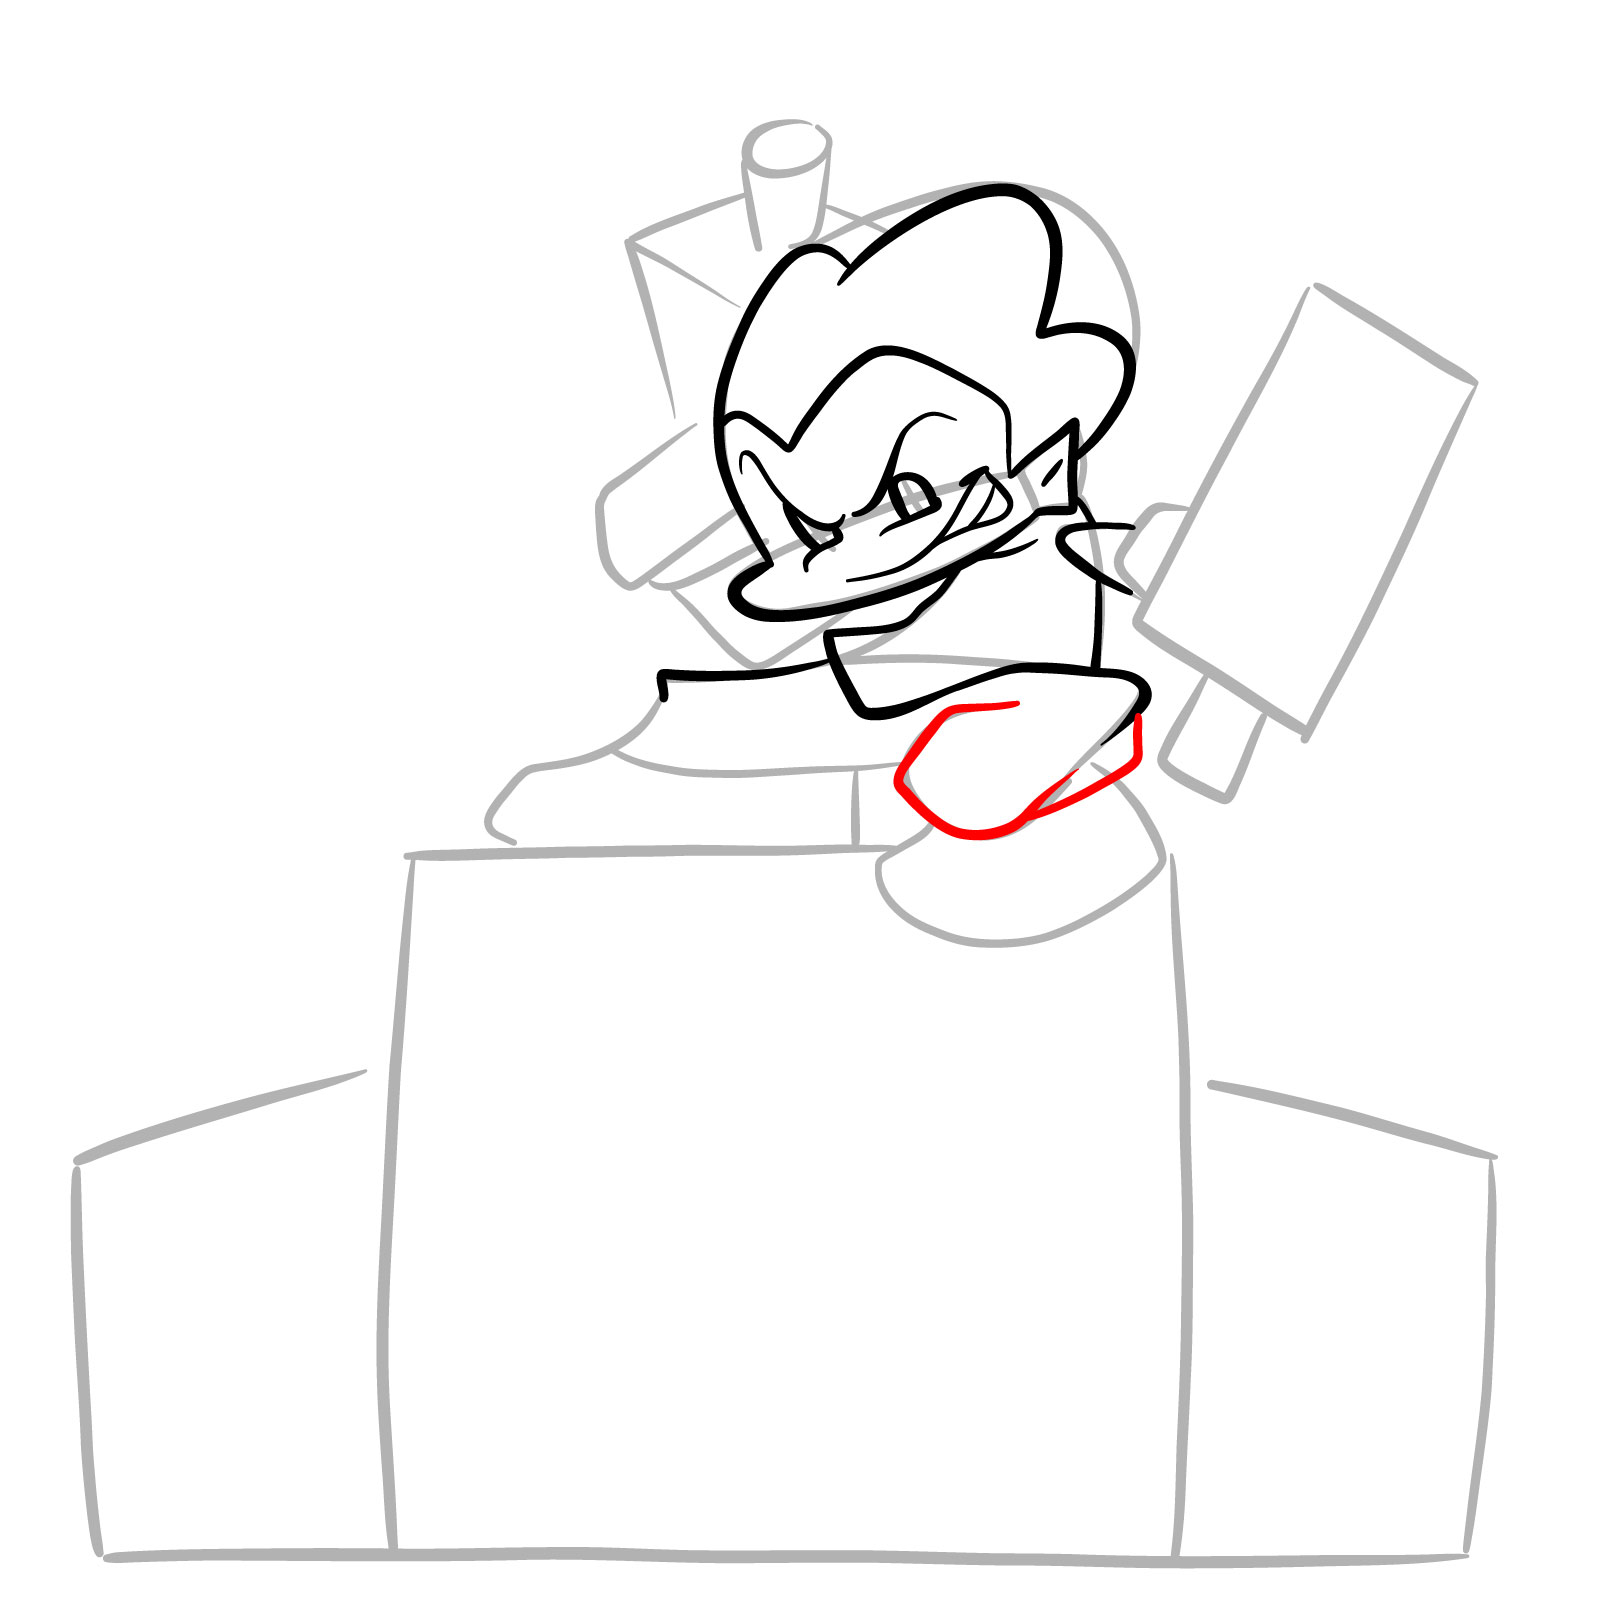 How to draw Pico on the speakers - step 12